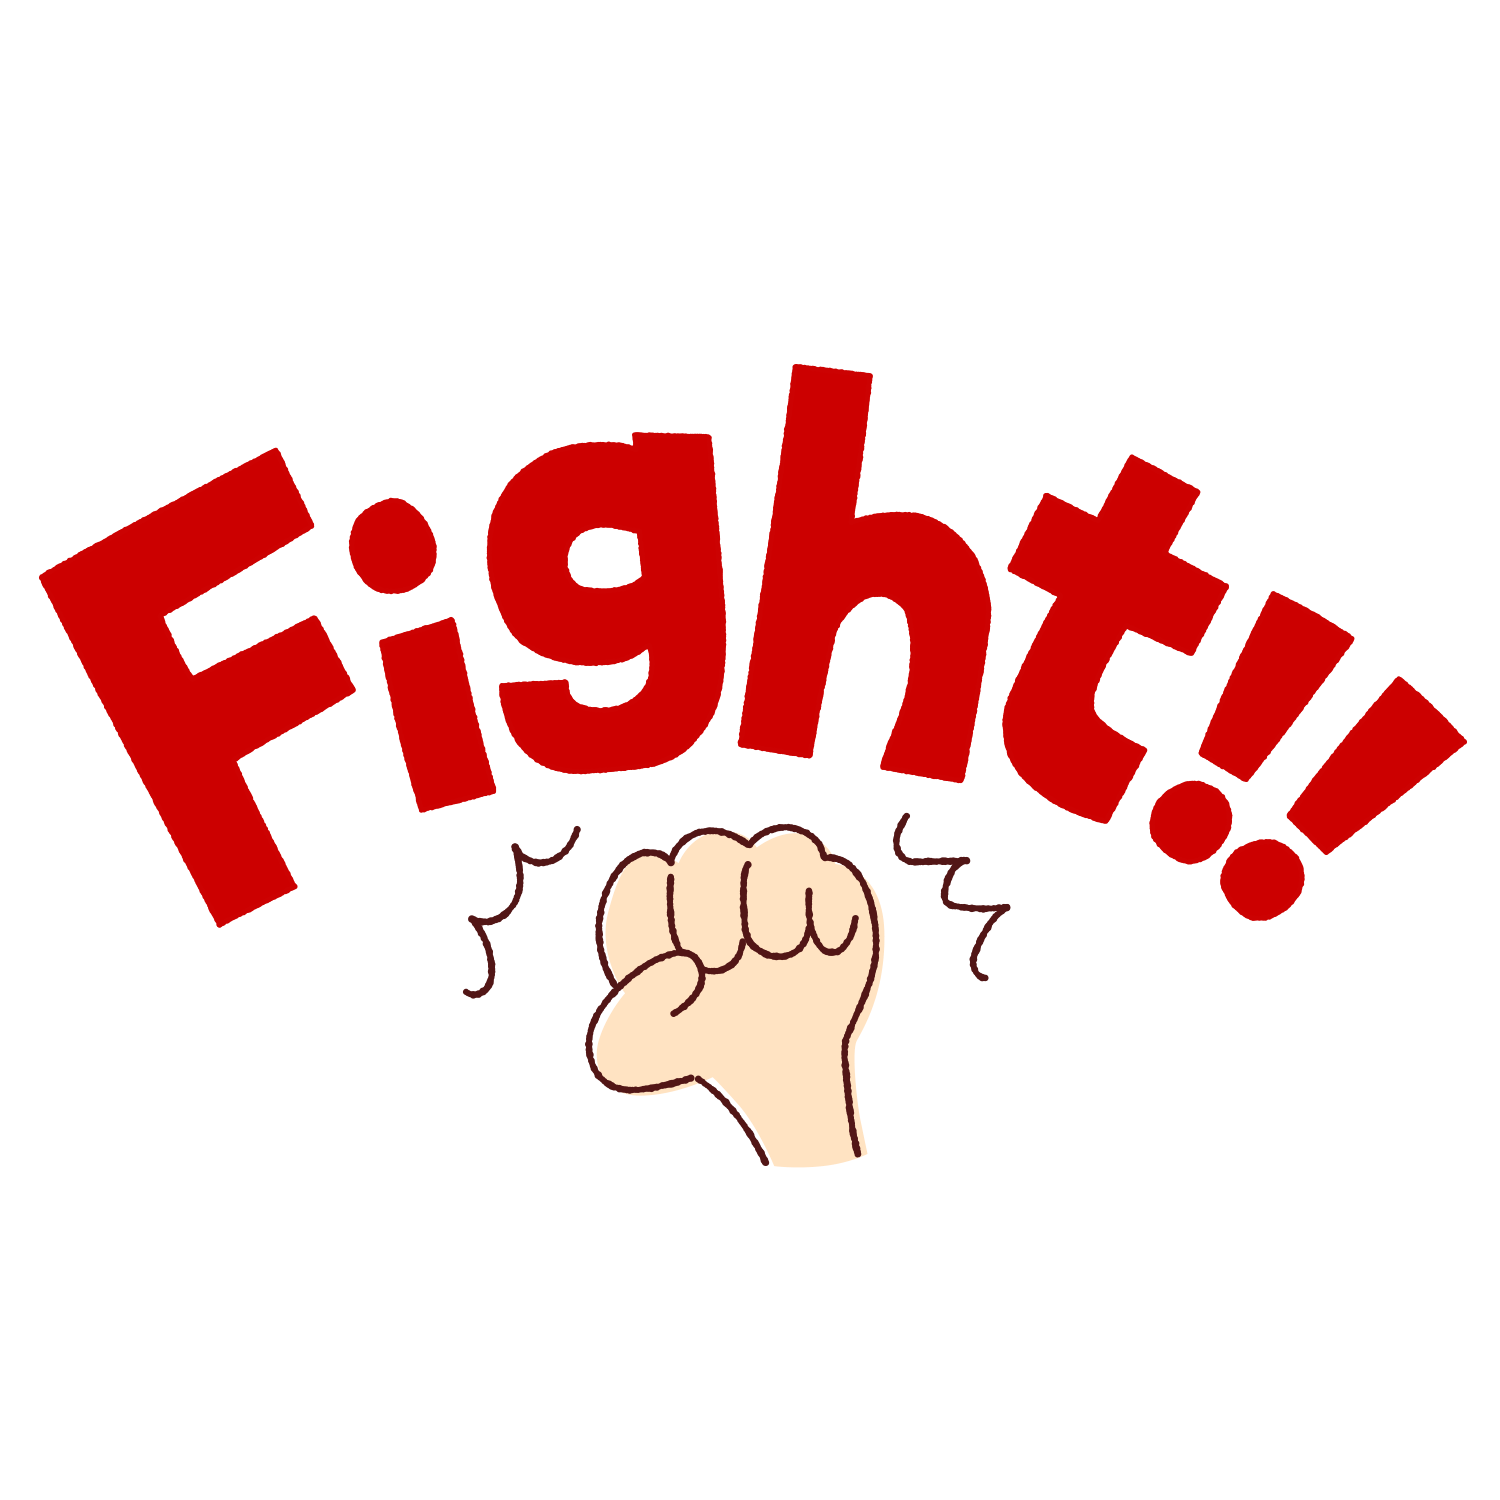 Fight（ファイト）の文字のイラスト